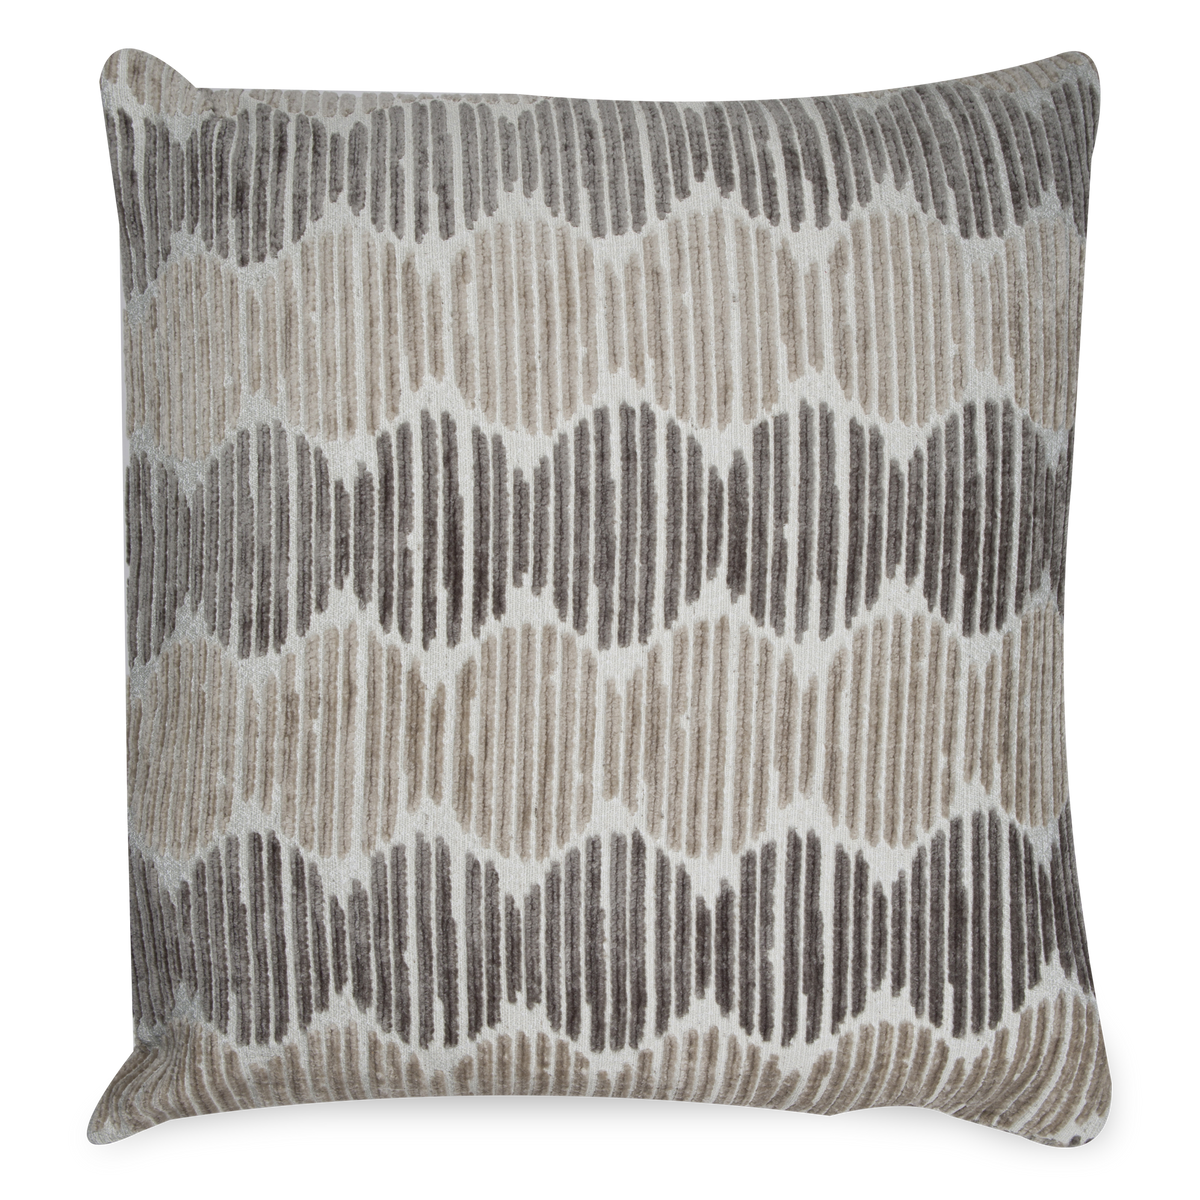 The Dunes Pillow features a bold geometric pattern enriched with texture in calming neutral tones.